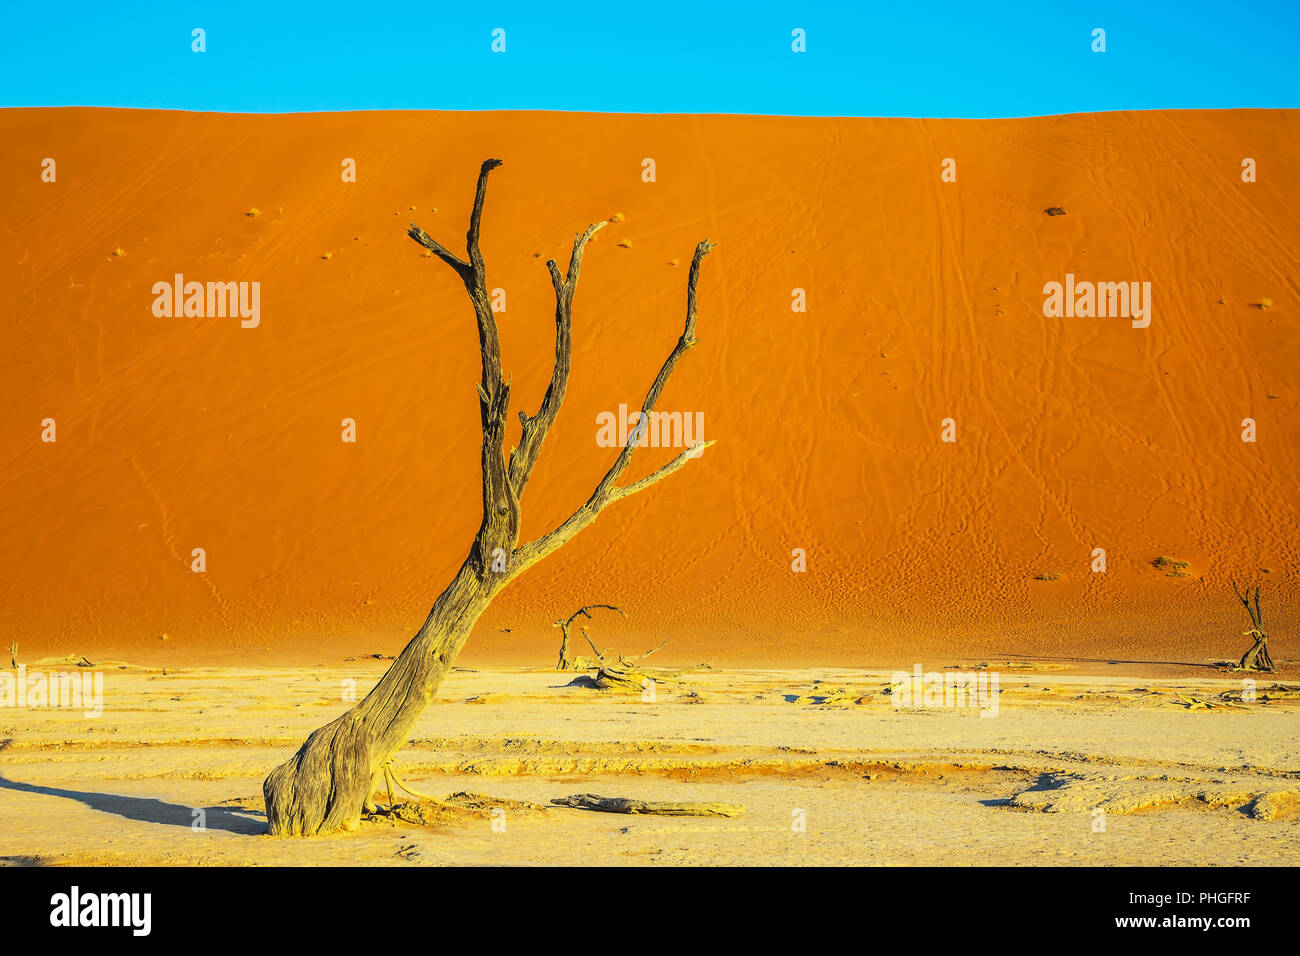 Picturesque ancient dried-up tree Stock Photo